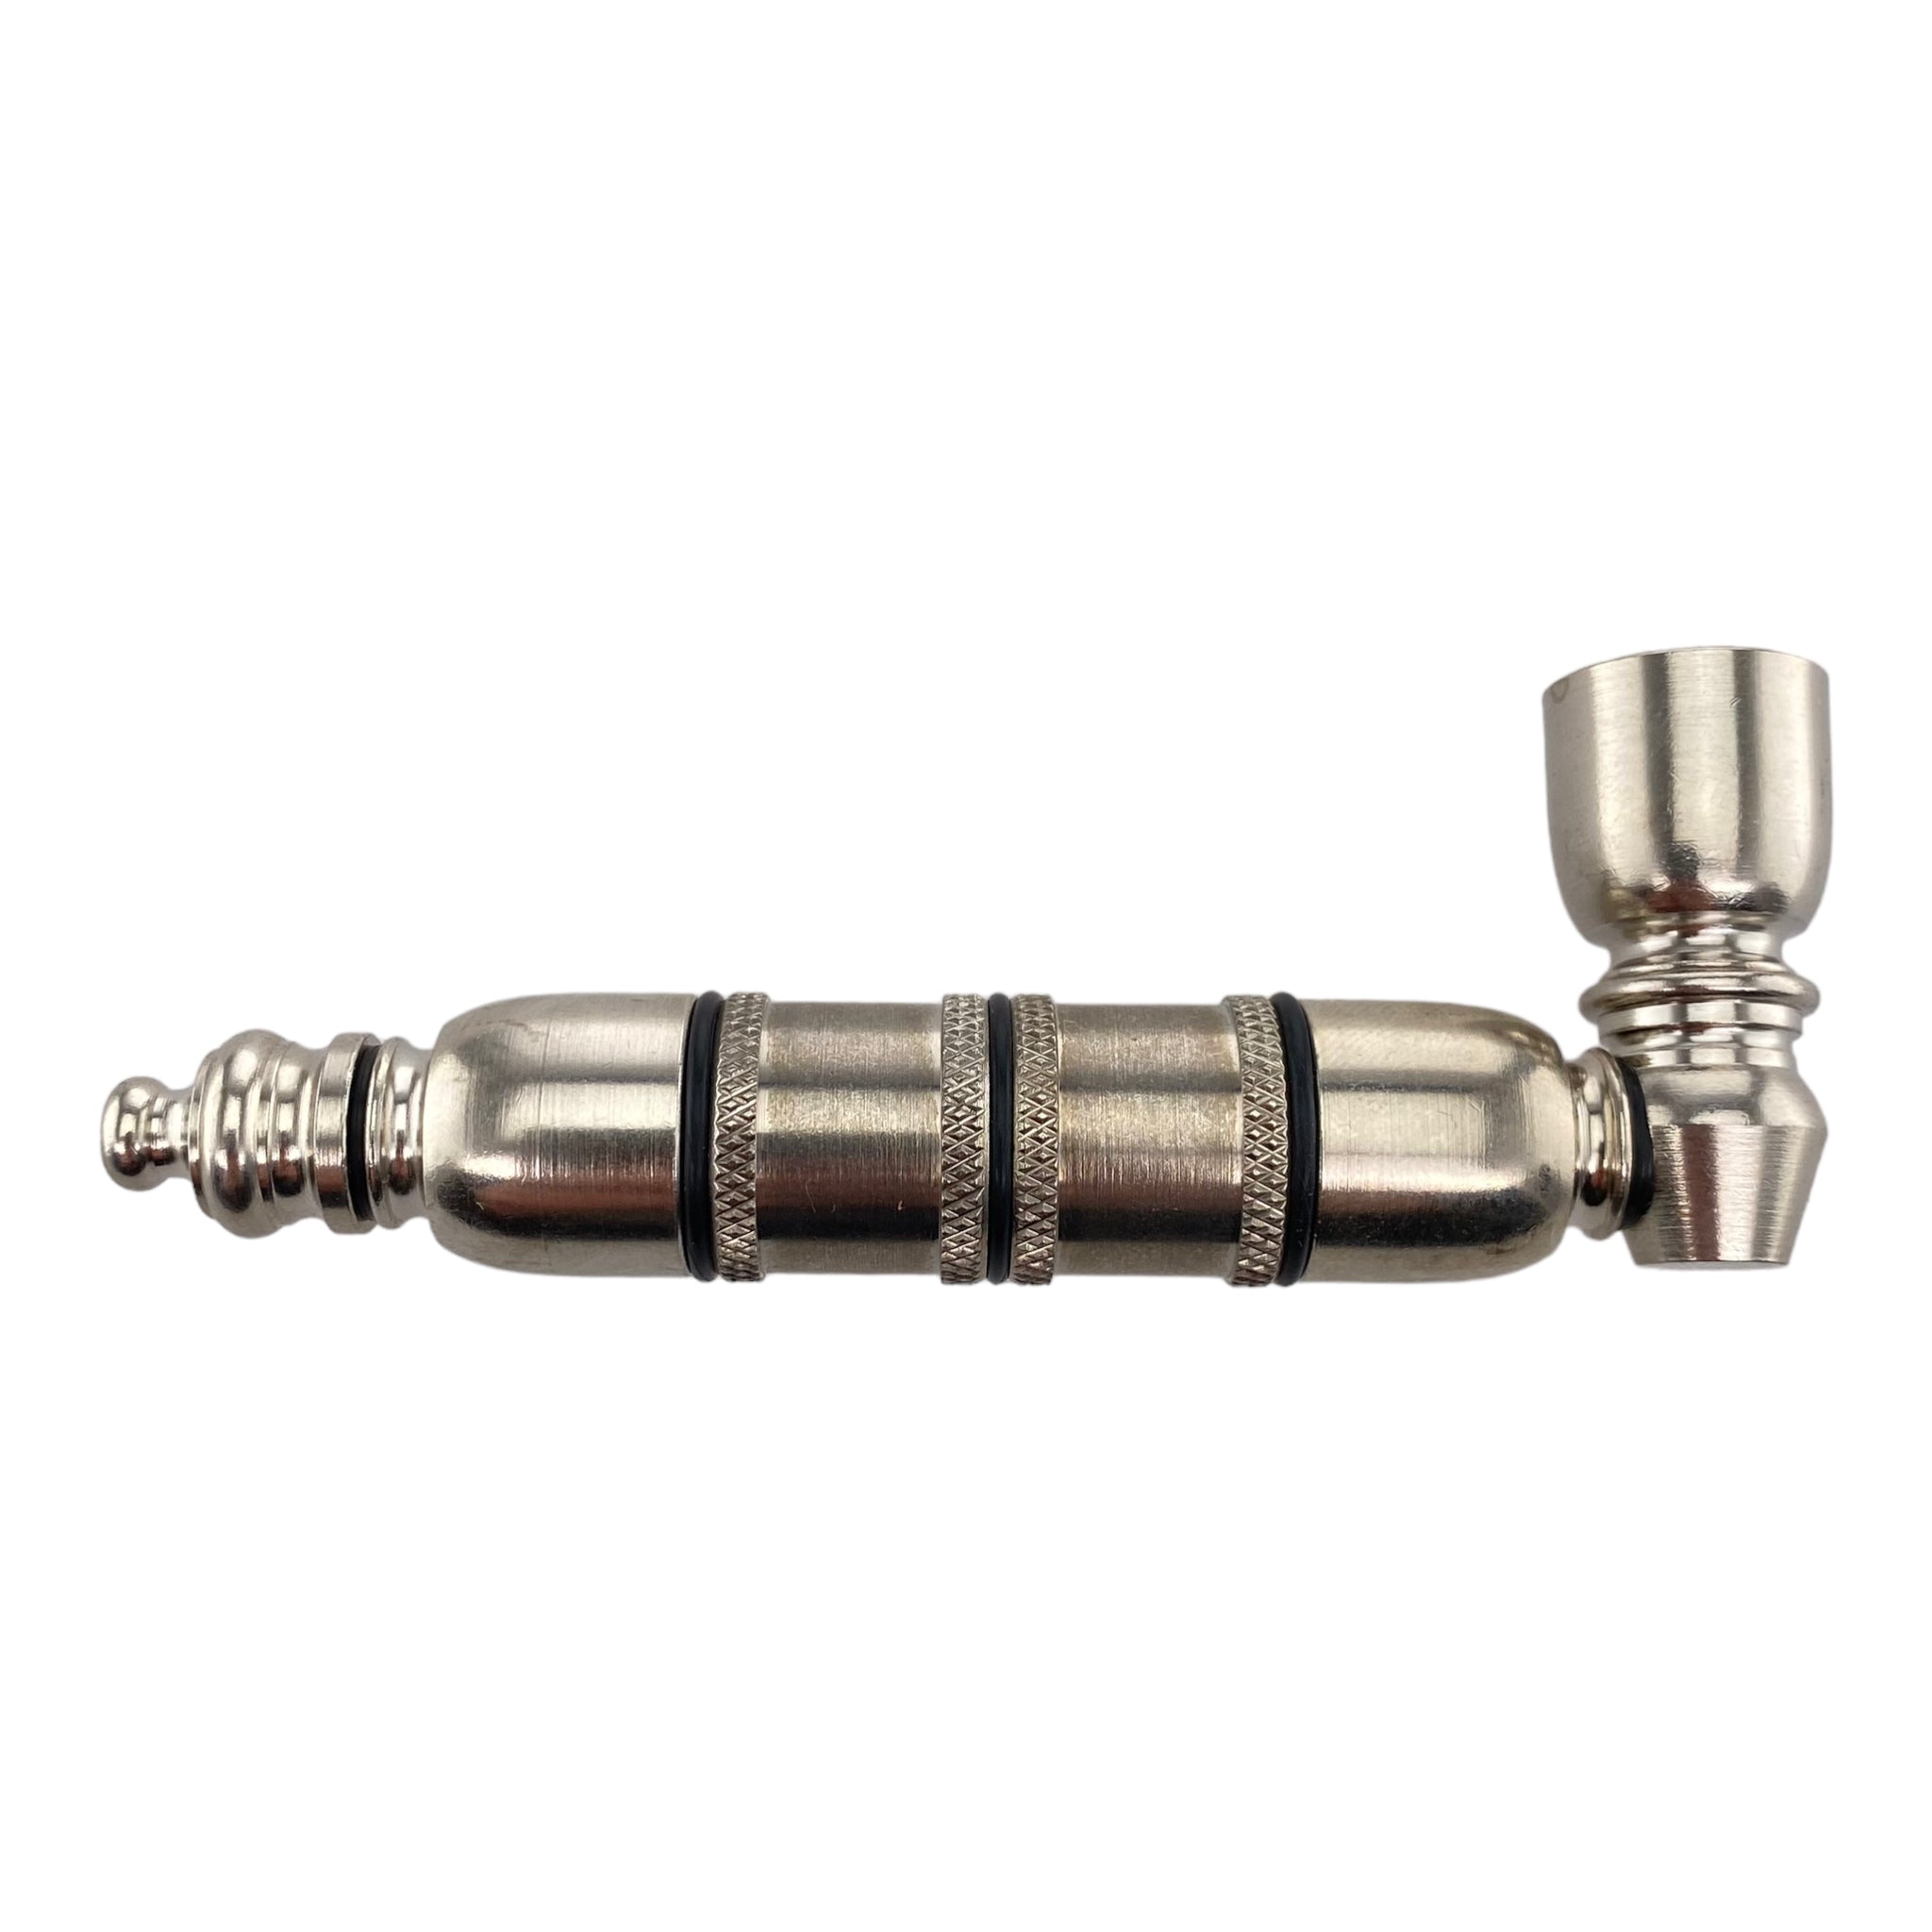 Metal weed pipe with multiple chambers best tobacco metal pipe